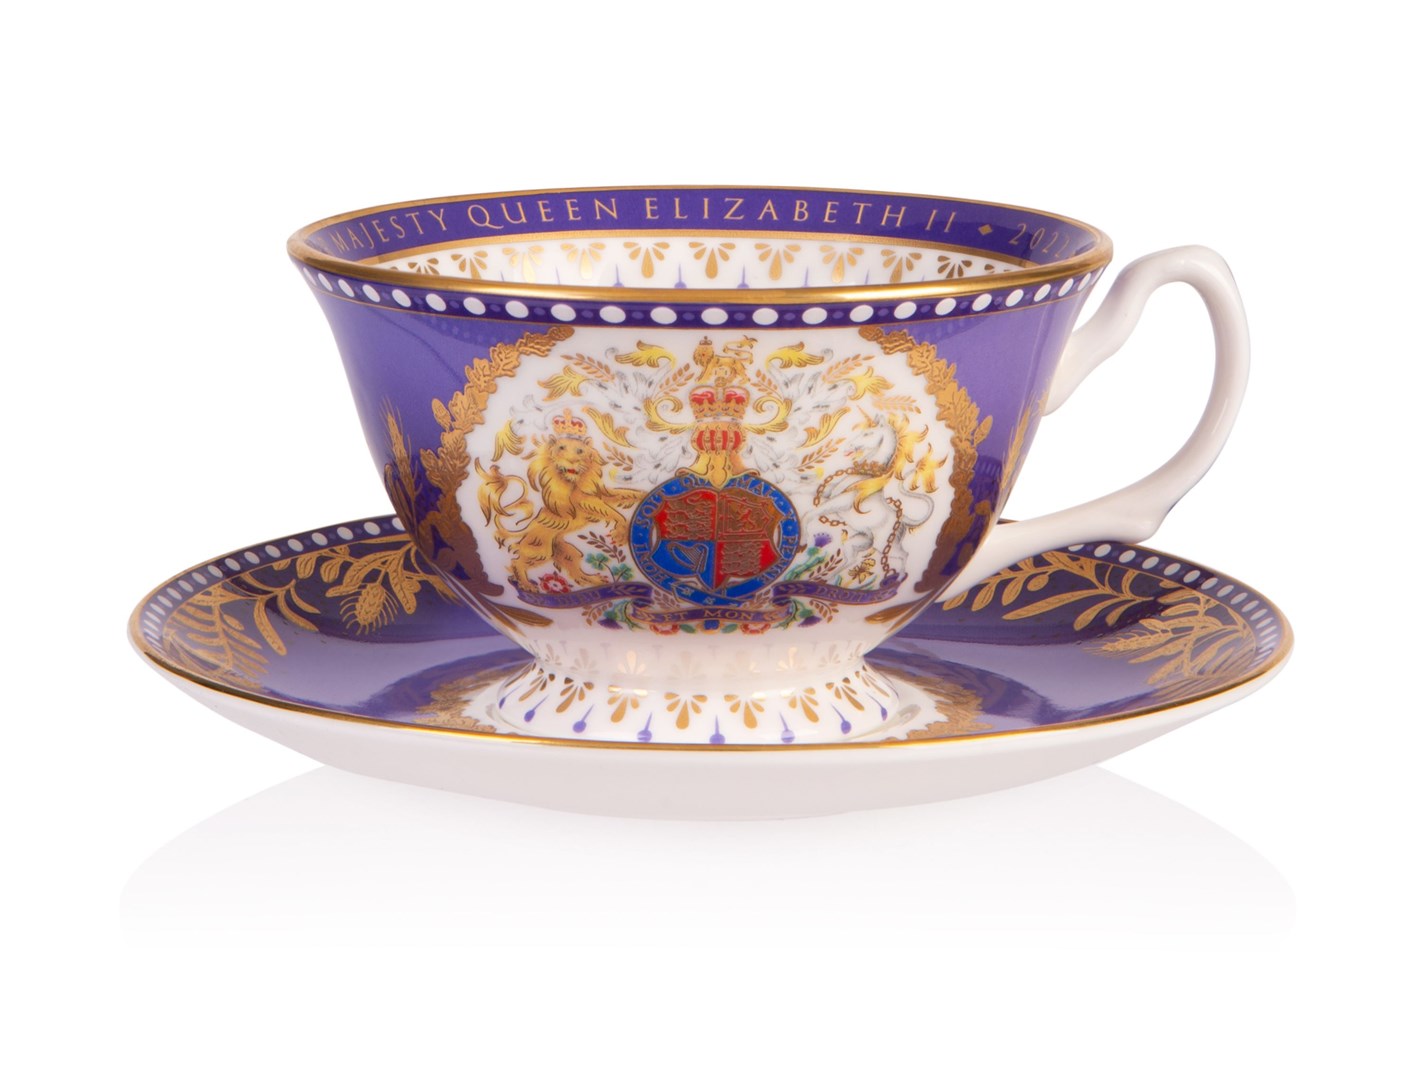 Official chinaware produced by the Royal Collection Trust for the Platinum Jubilee (Royal Collection Trust/HM Queen Elizabeth II/PA)